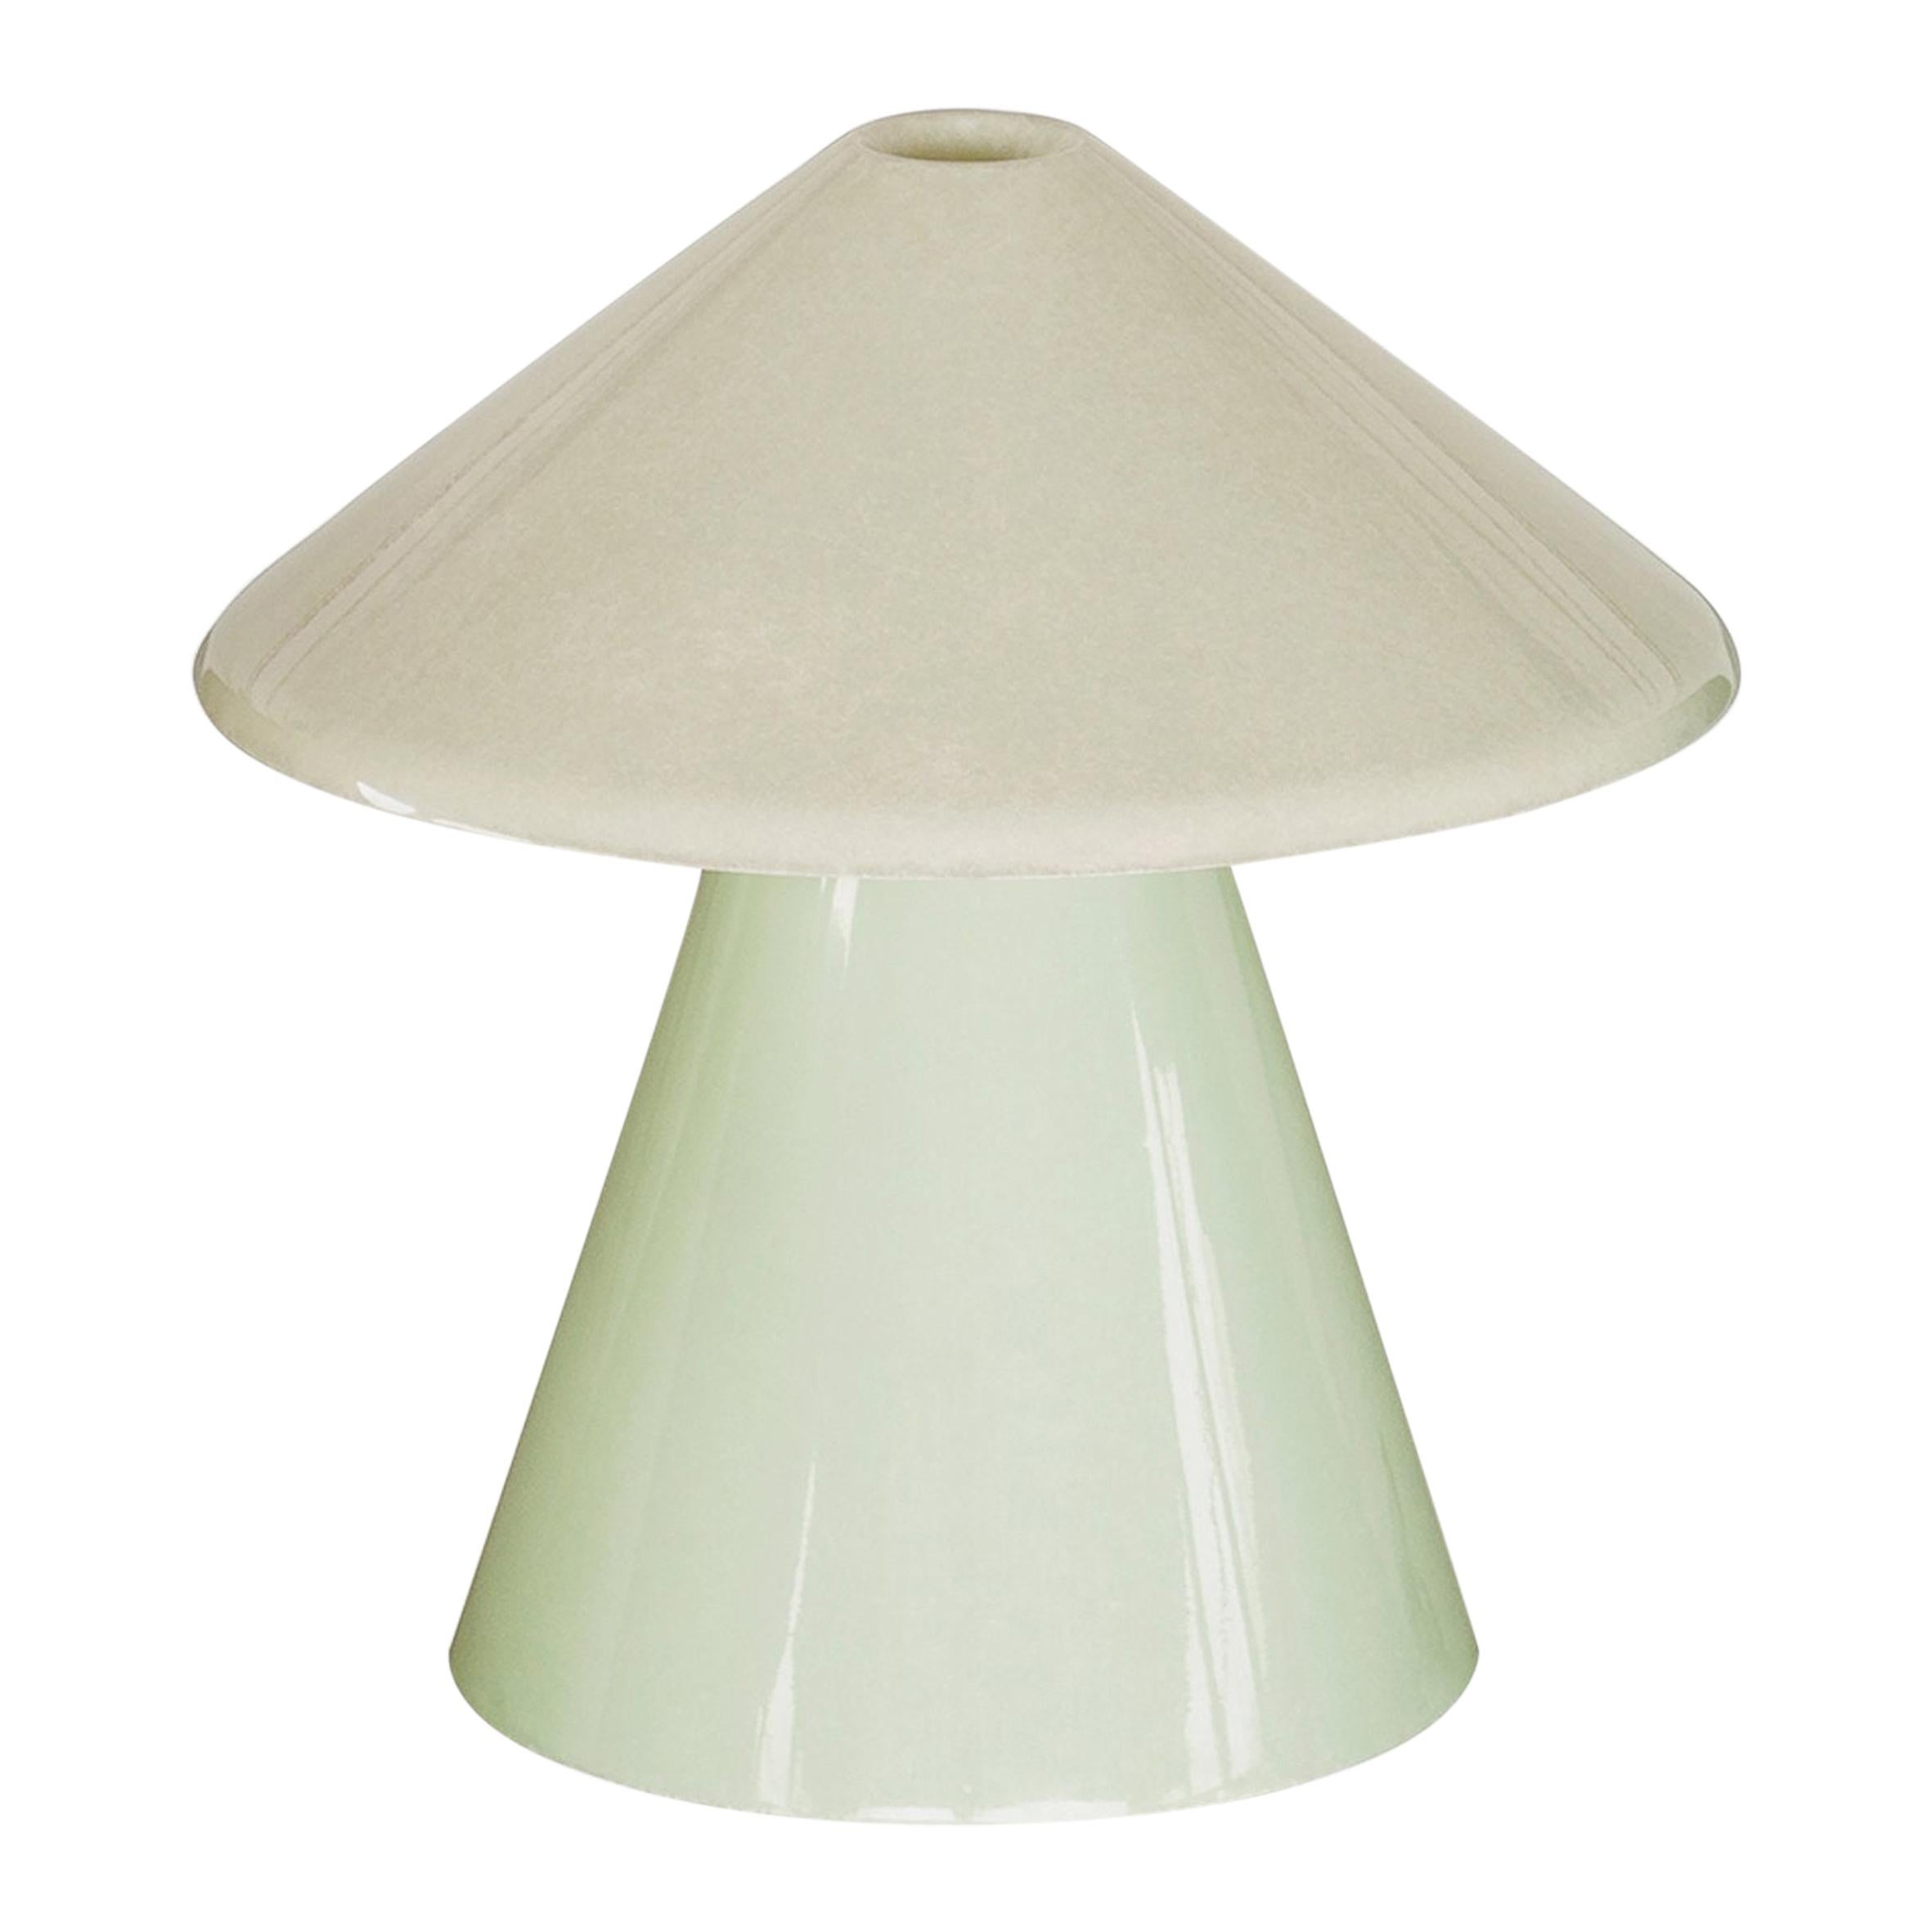 Tacchini A.D.A Lamp Designed by Umberto Riva